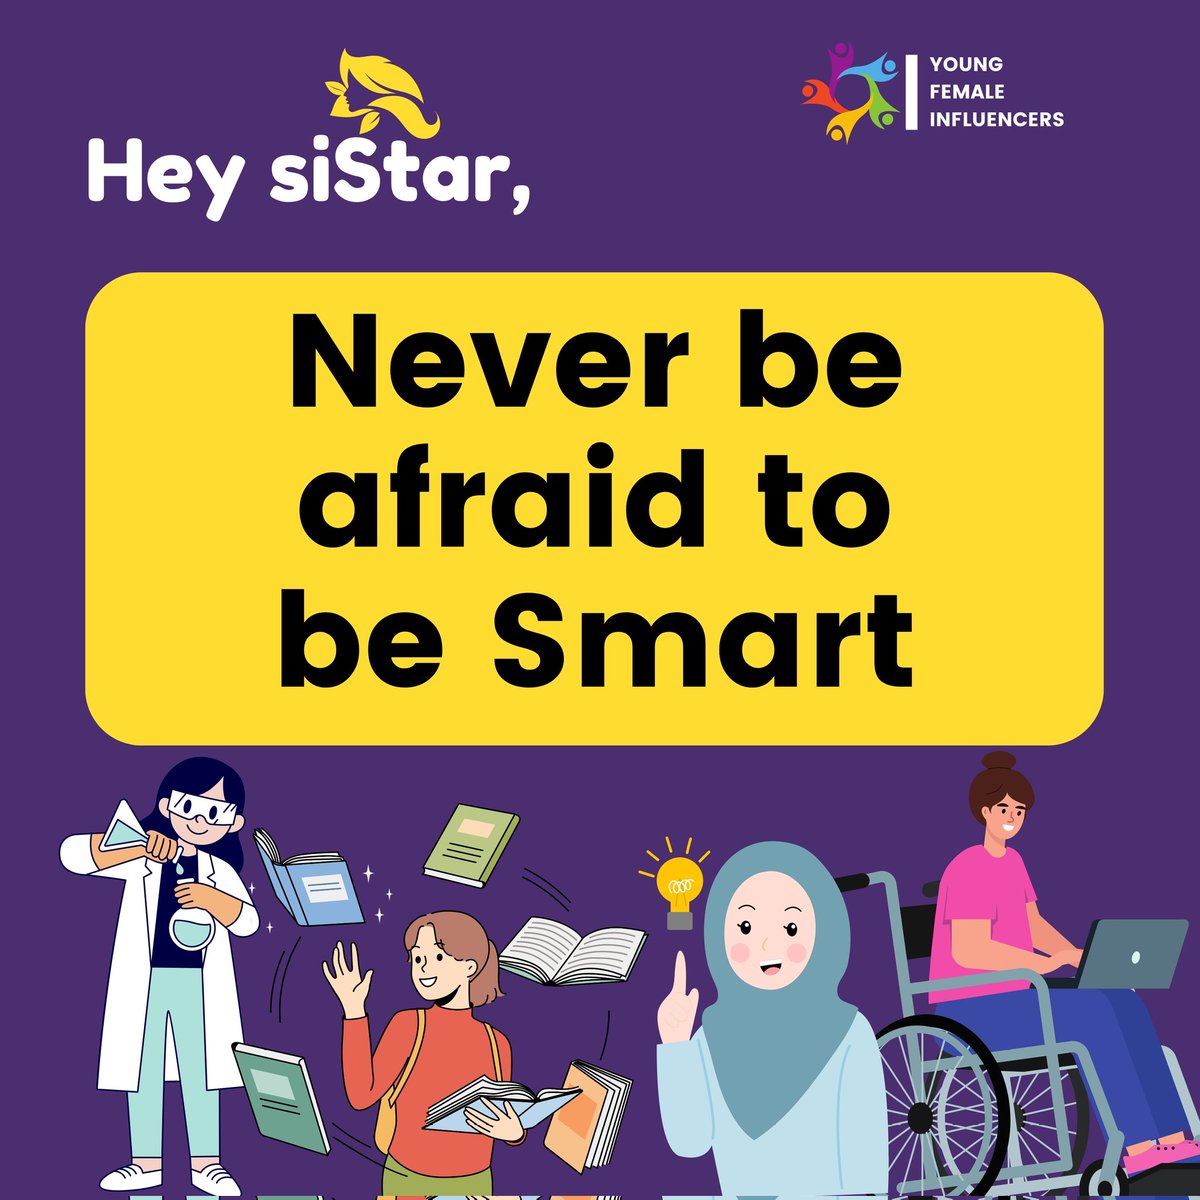 Hey siStar, 'Never be afraid to be smart.' Intelligence is a powerful tool for change and progress. @yfinfluencers, we believe in the strength and potential of every girl and young woman. Embrace your intelligence, share your ideas, and lead the way to a better future. #Monday